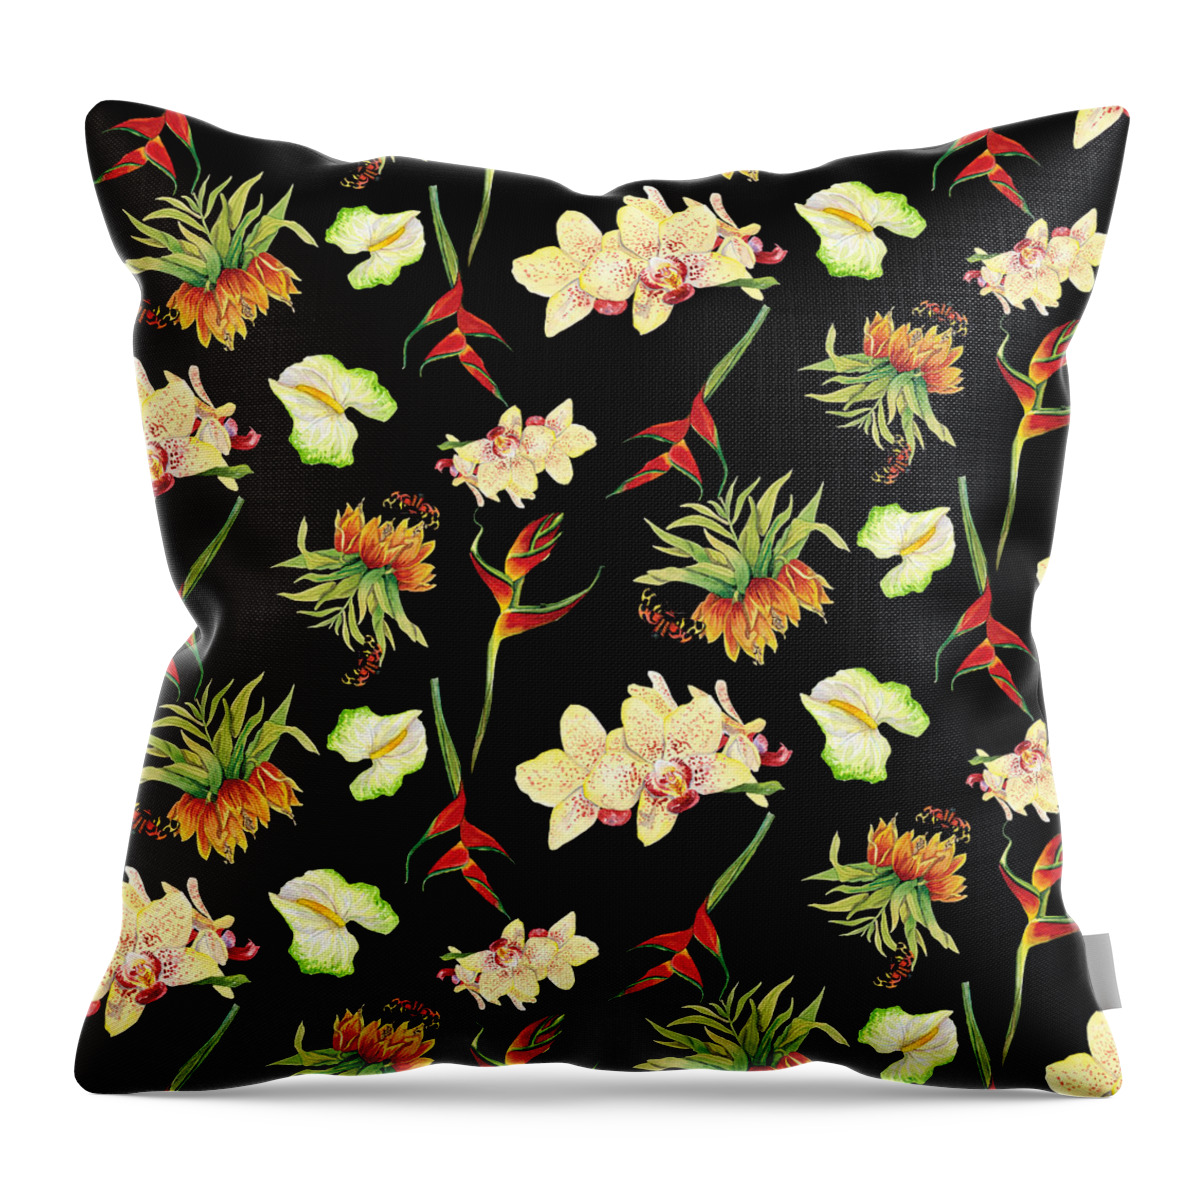 Orchid Throw Pillow featuring the painting Tropical Island Floral Half Drop Pattern by Audrey Jeanne Roberts